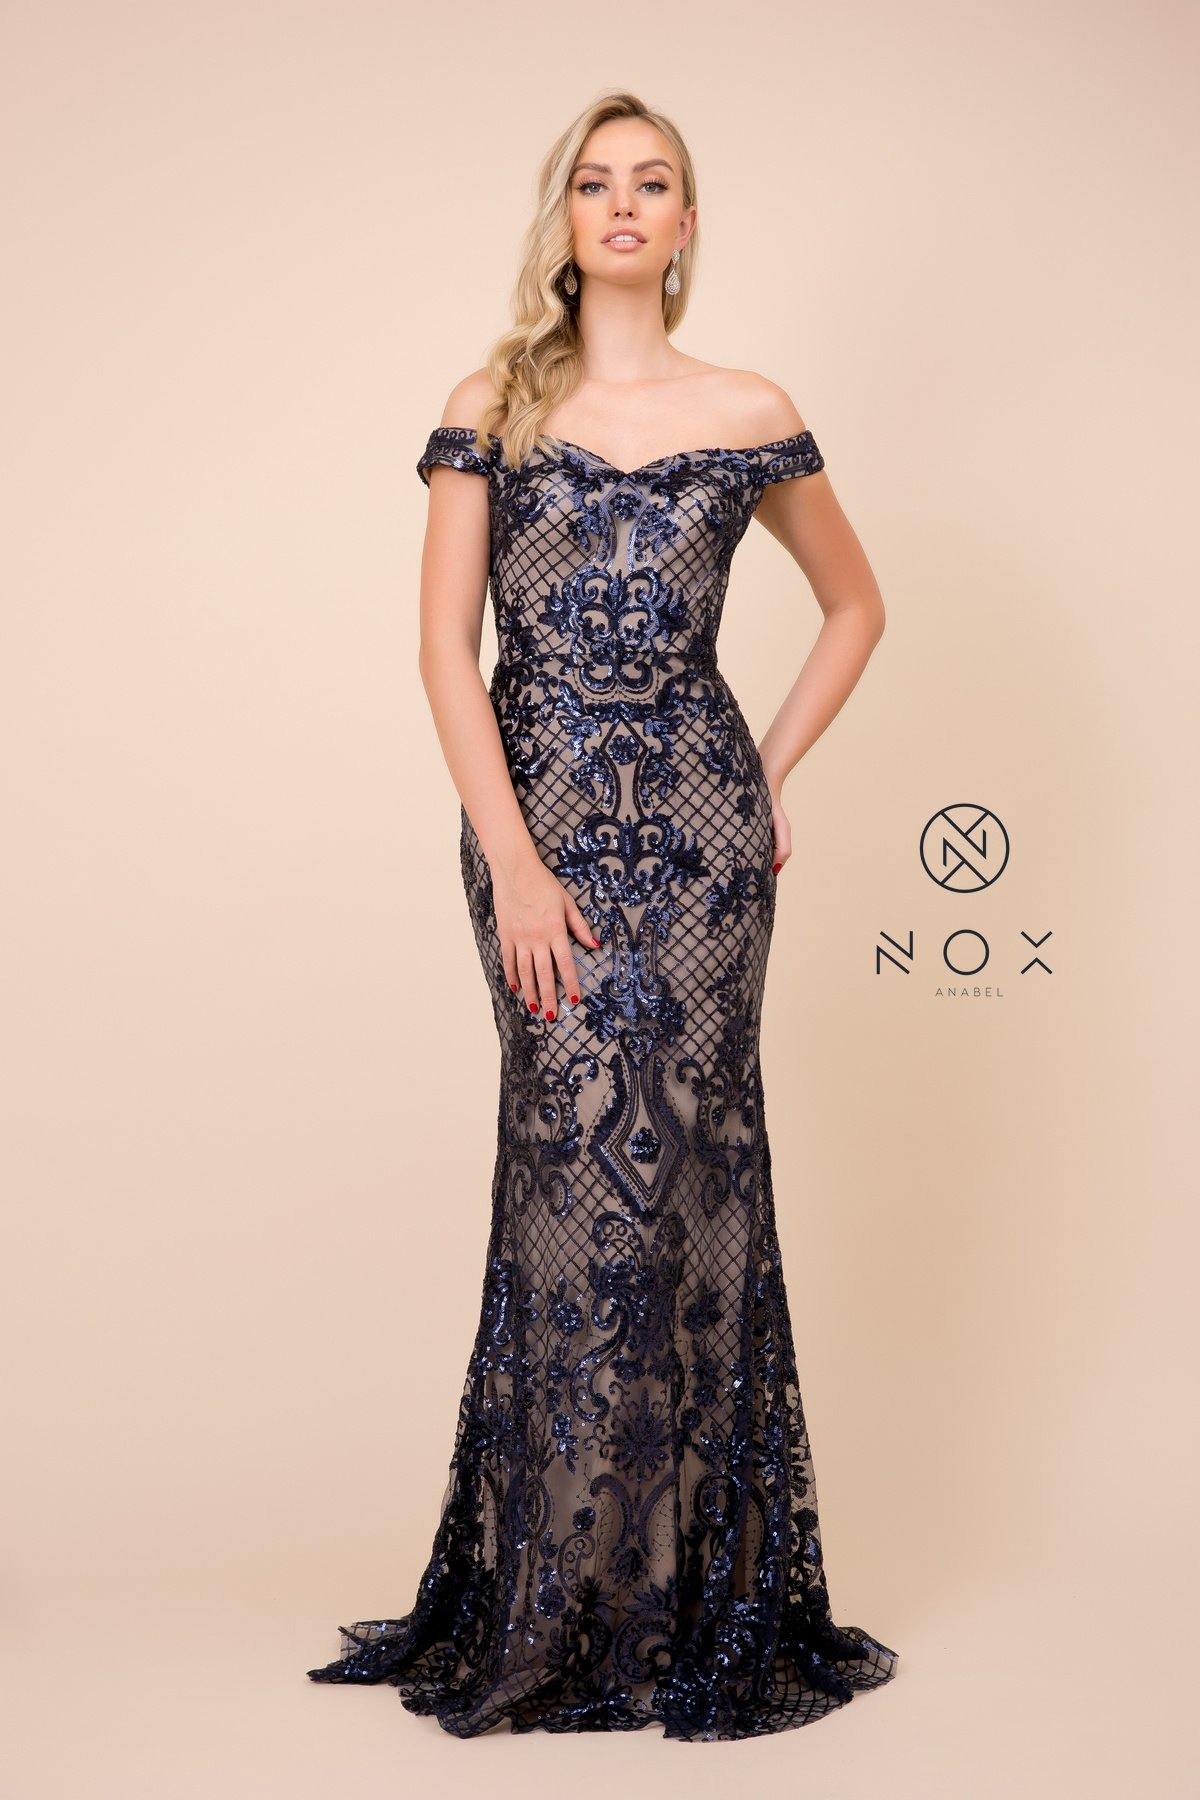 Sequin Embroidered Long Fitted Prom Dress - The Dress Outlet Nox Anabel